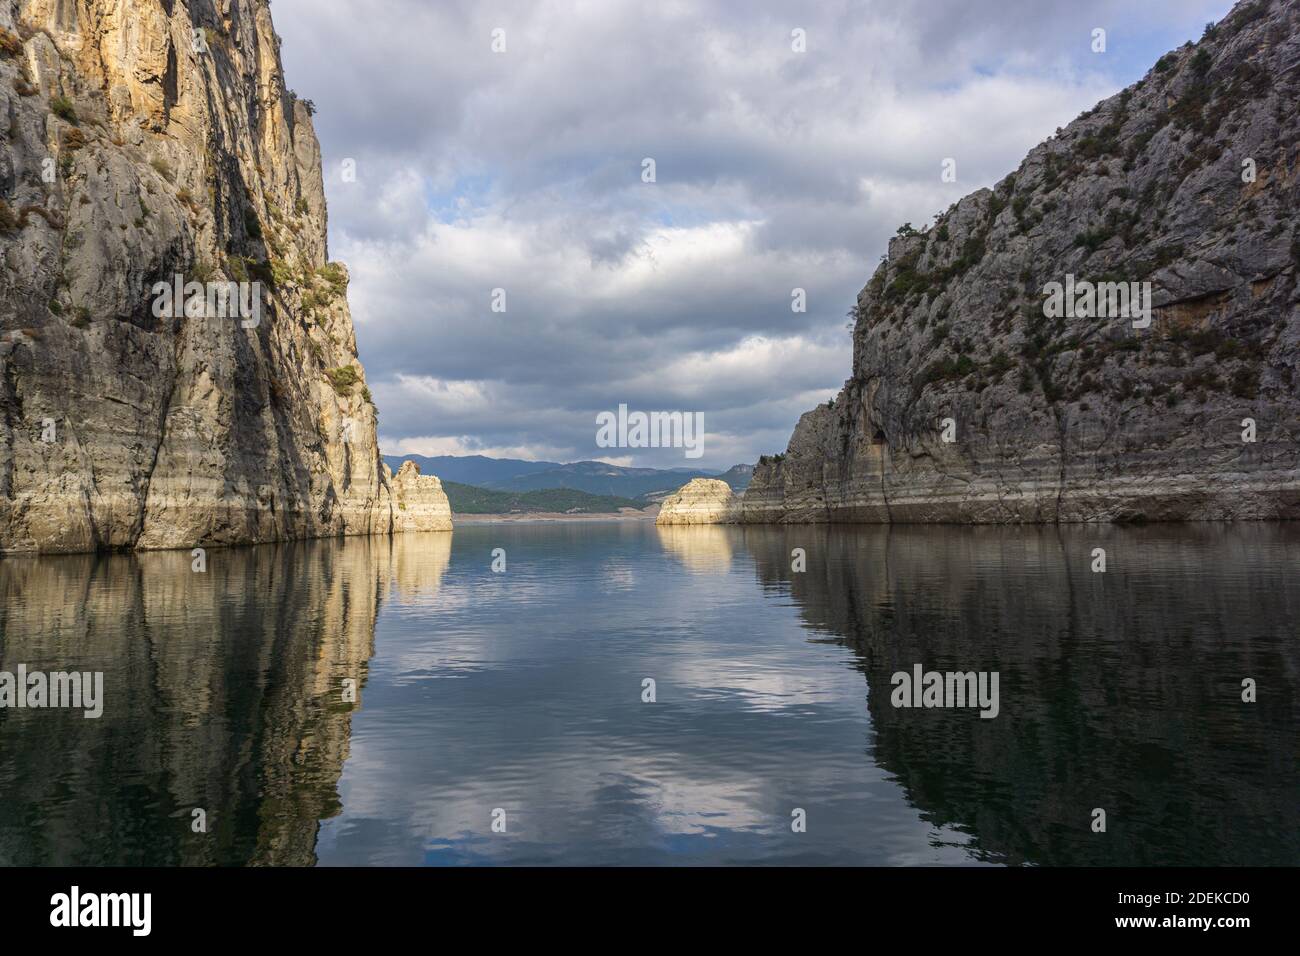 Reflection of rocks in water on a cloudy day Stock Photo